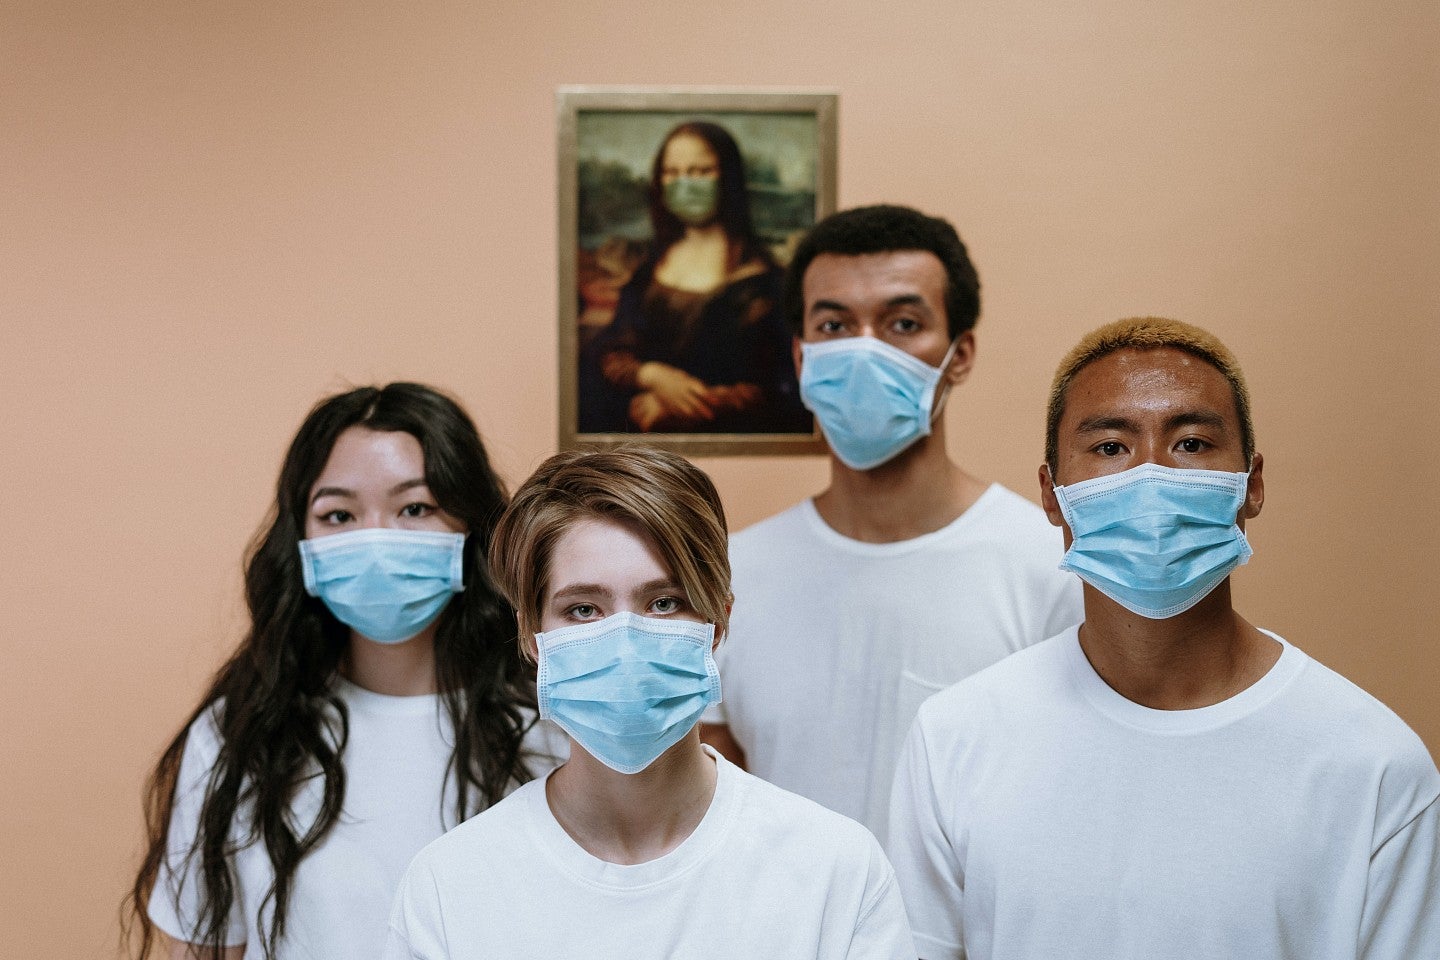 Young people wearing masks in front of a picture of the Mona Lisa, also wearing a mask.